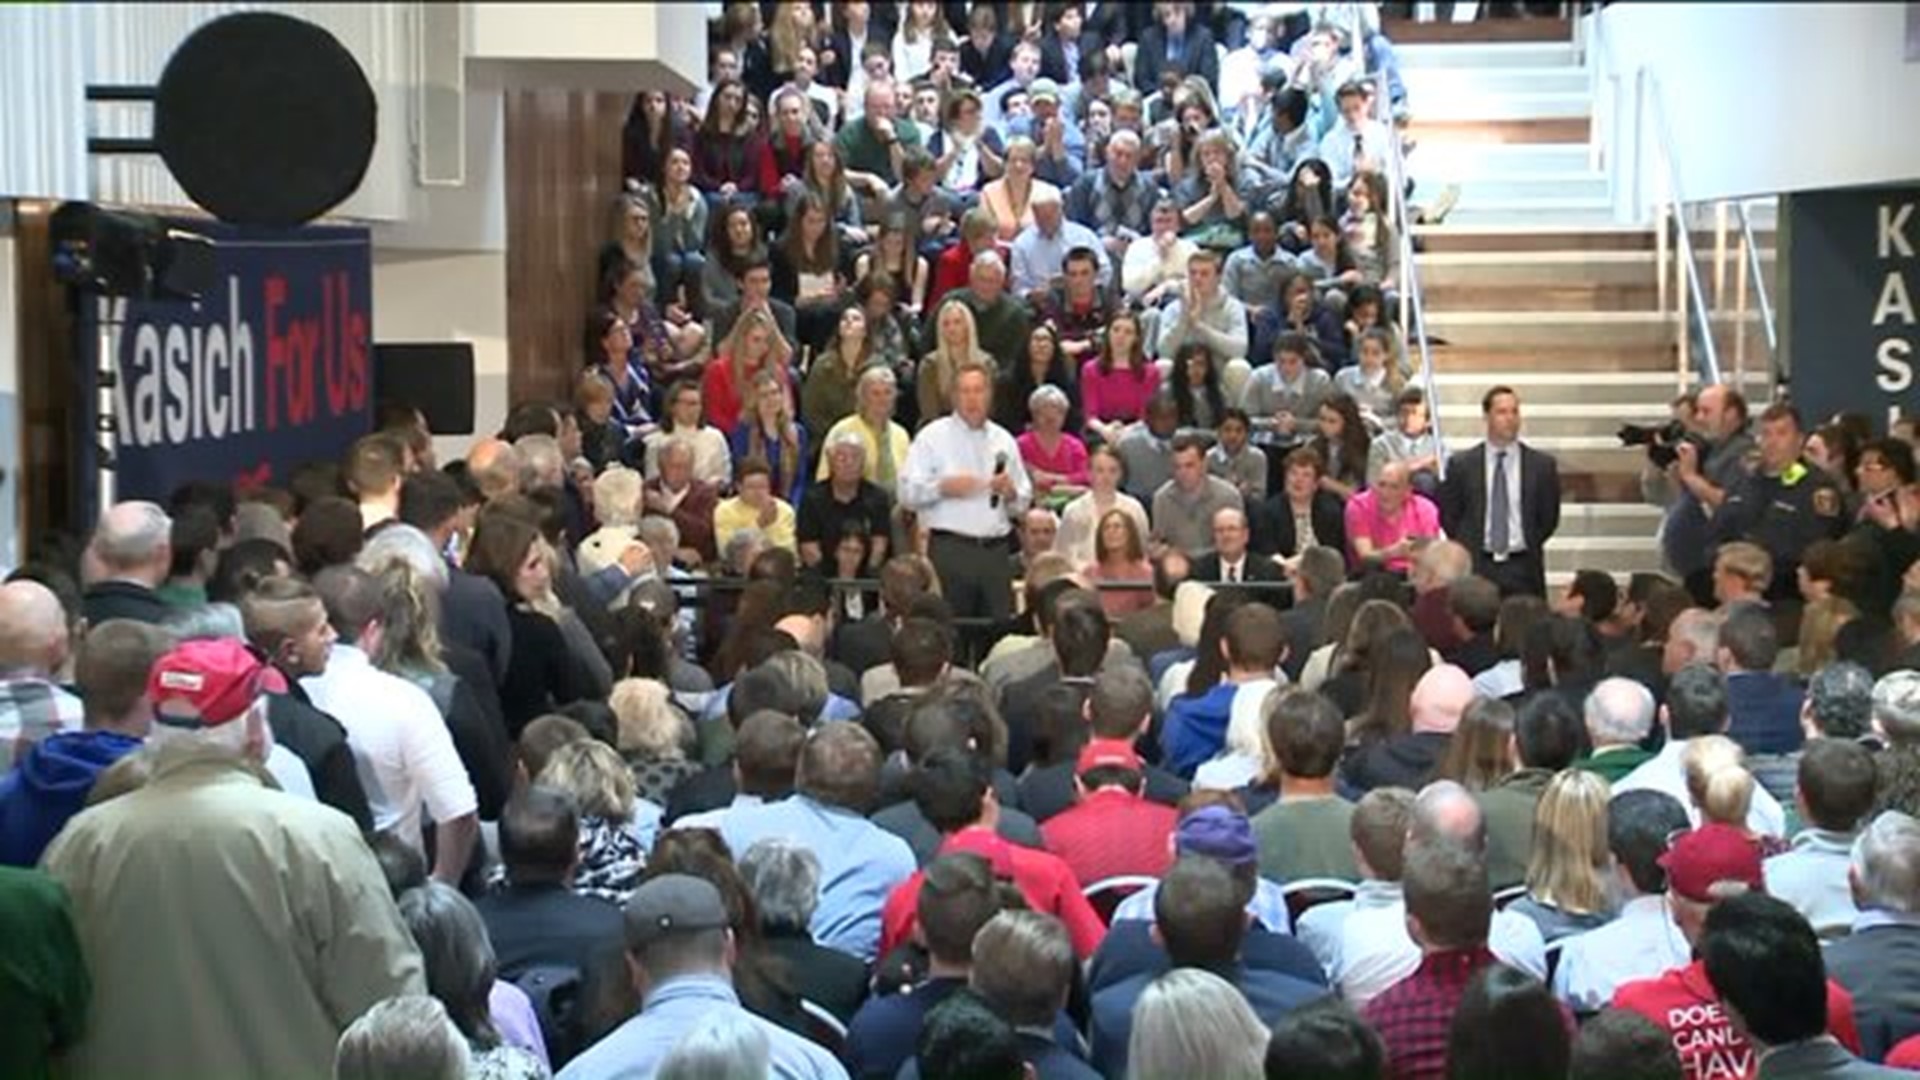 Enormous crowd turns out to hear presidential candidate Kasich